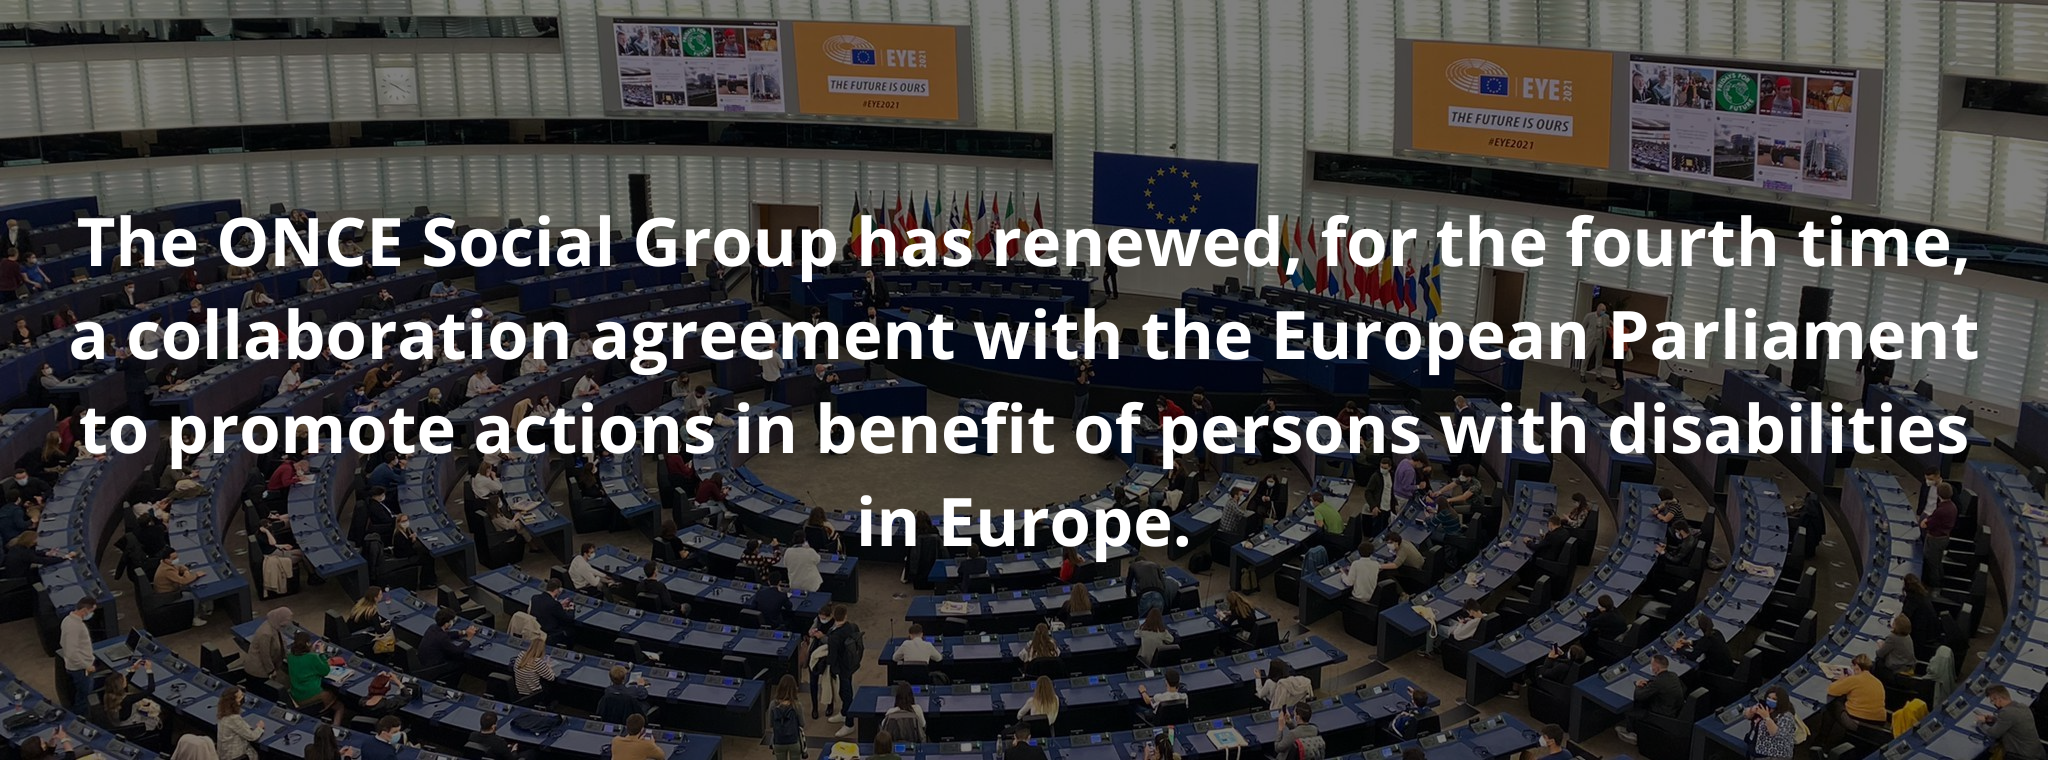 The ONCE Social Group has renewed, for the fourth time, a collaboration agreement with the European Parliament to promote actions in benefit of persons with disabilities in Europe.